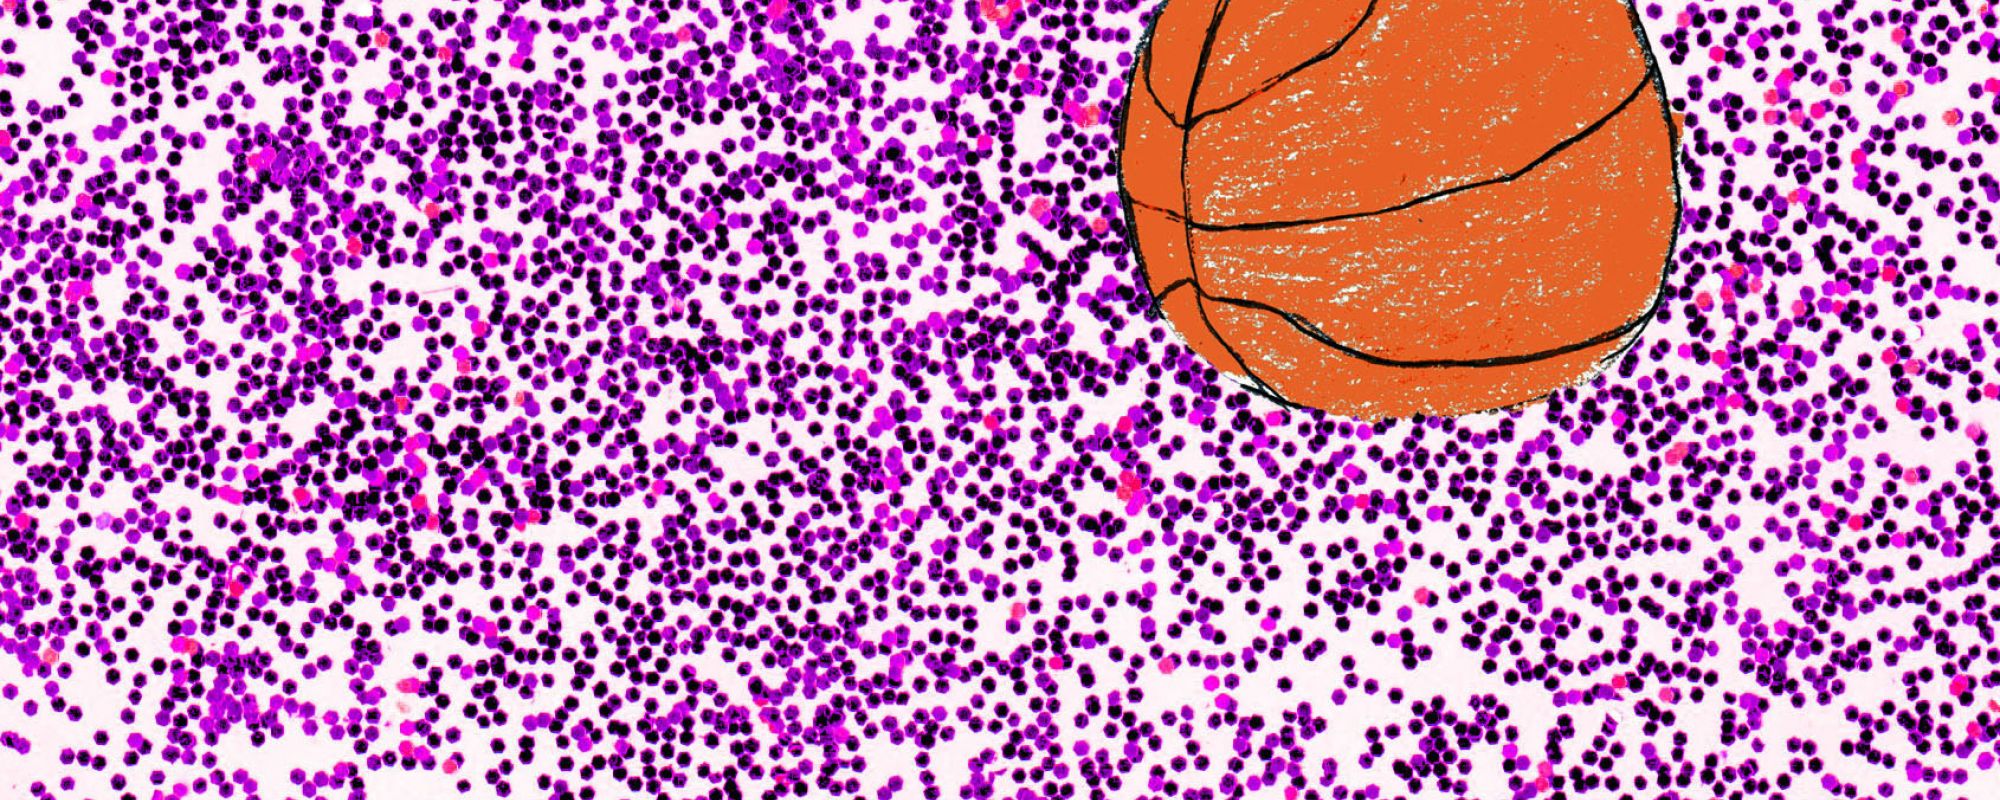 Basketball surrounded by a purple glitter backdrop